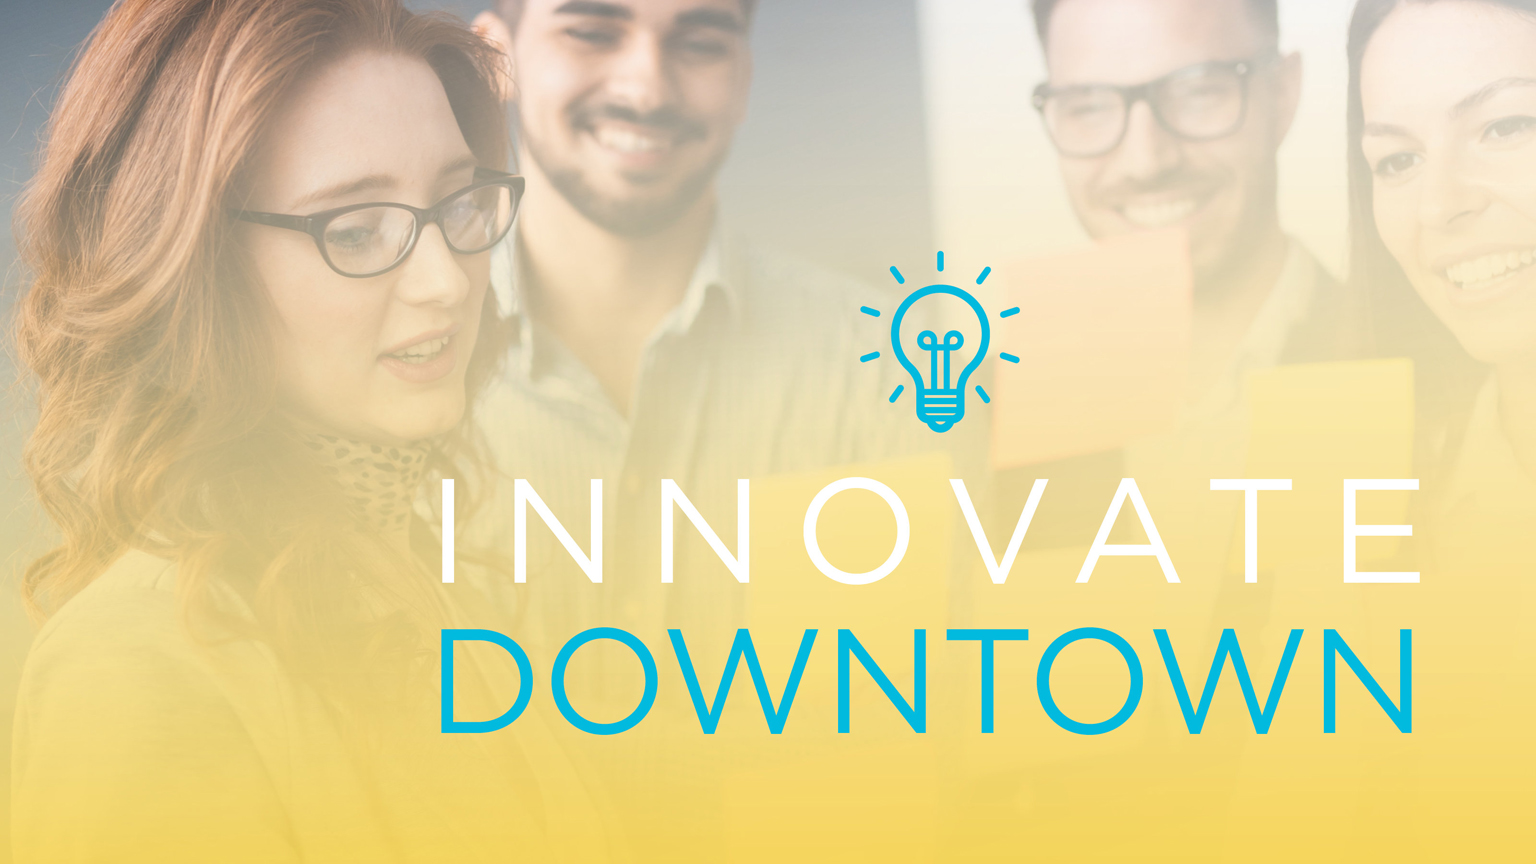 Inventors Showcase New Ideas at "Innovate Downtown" April 27